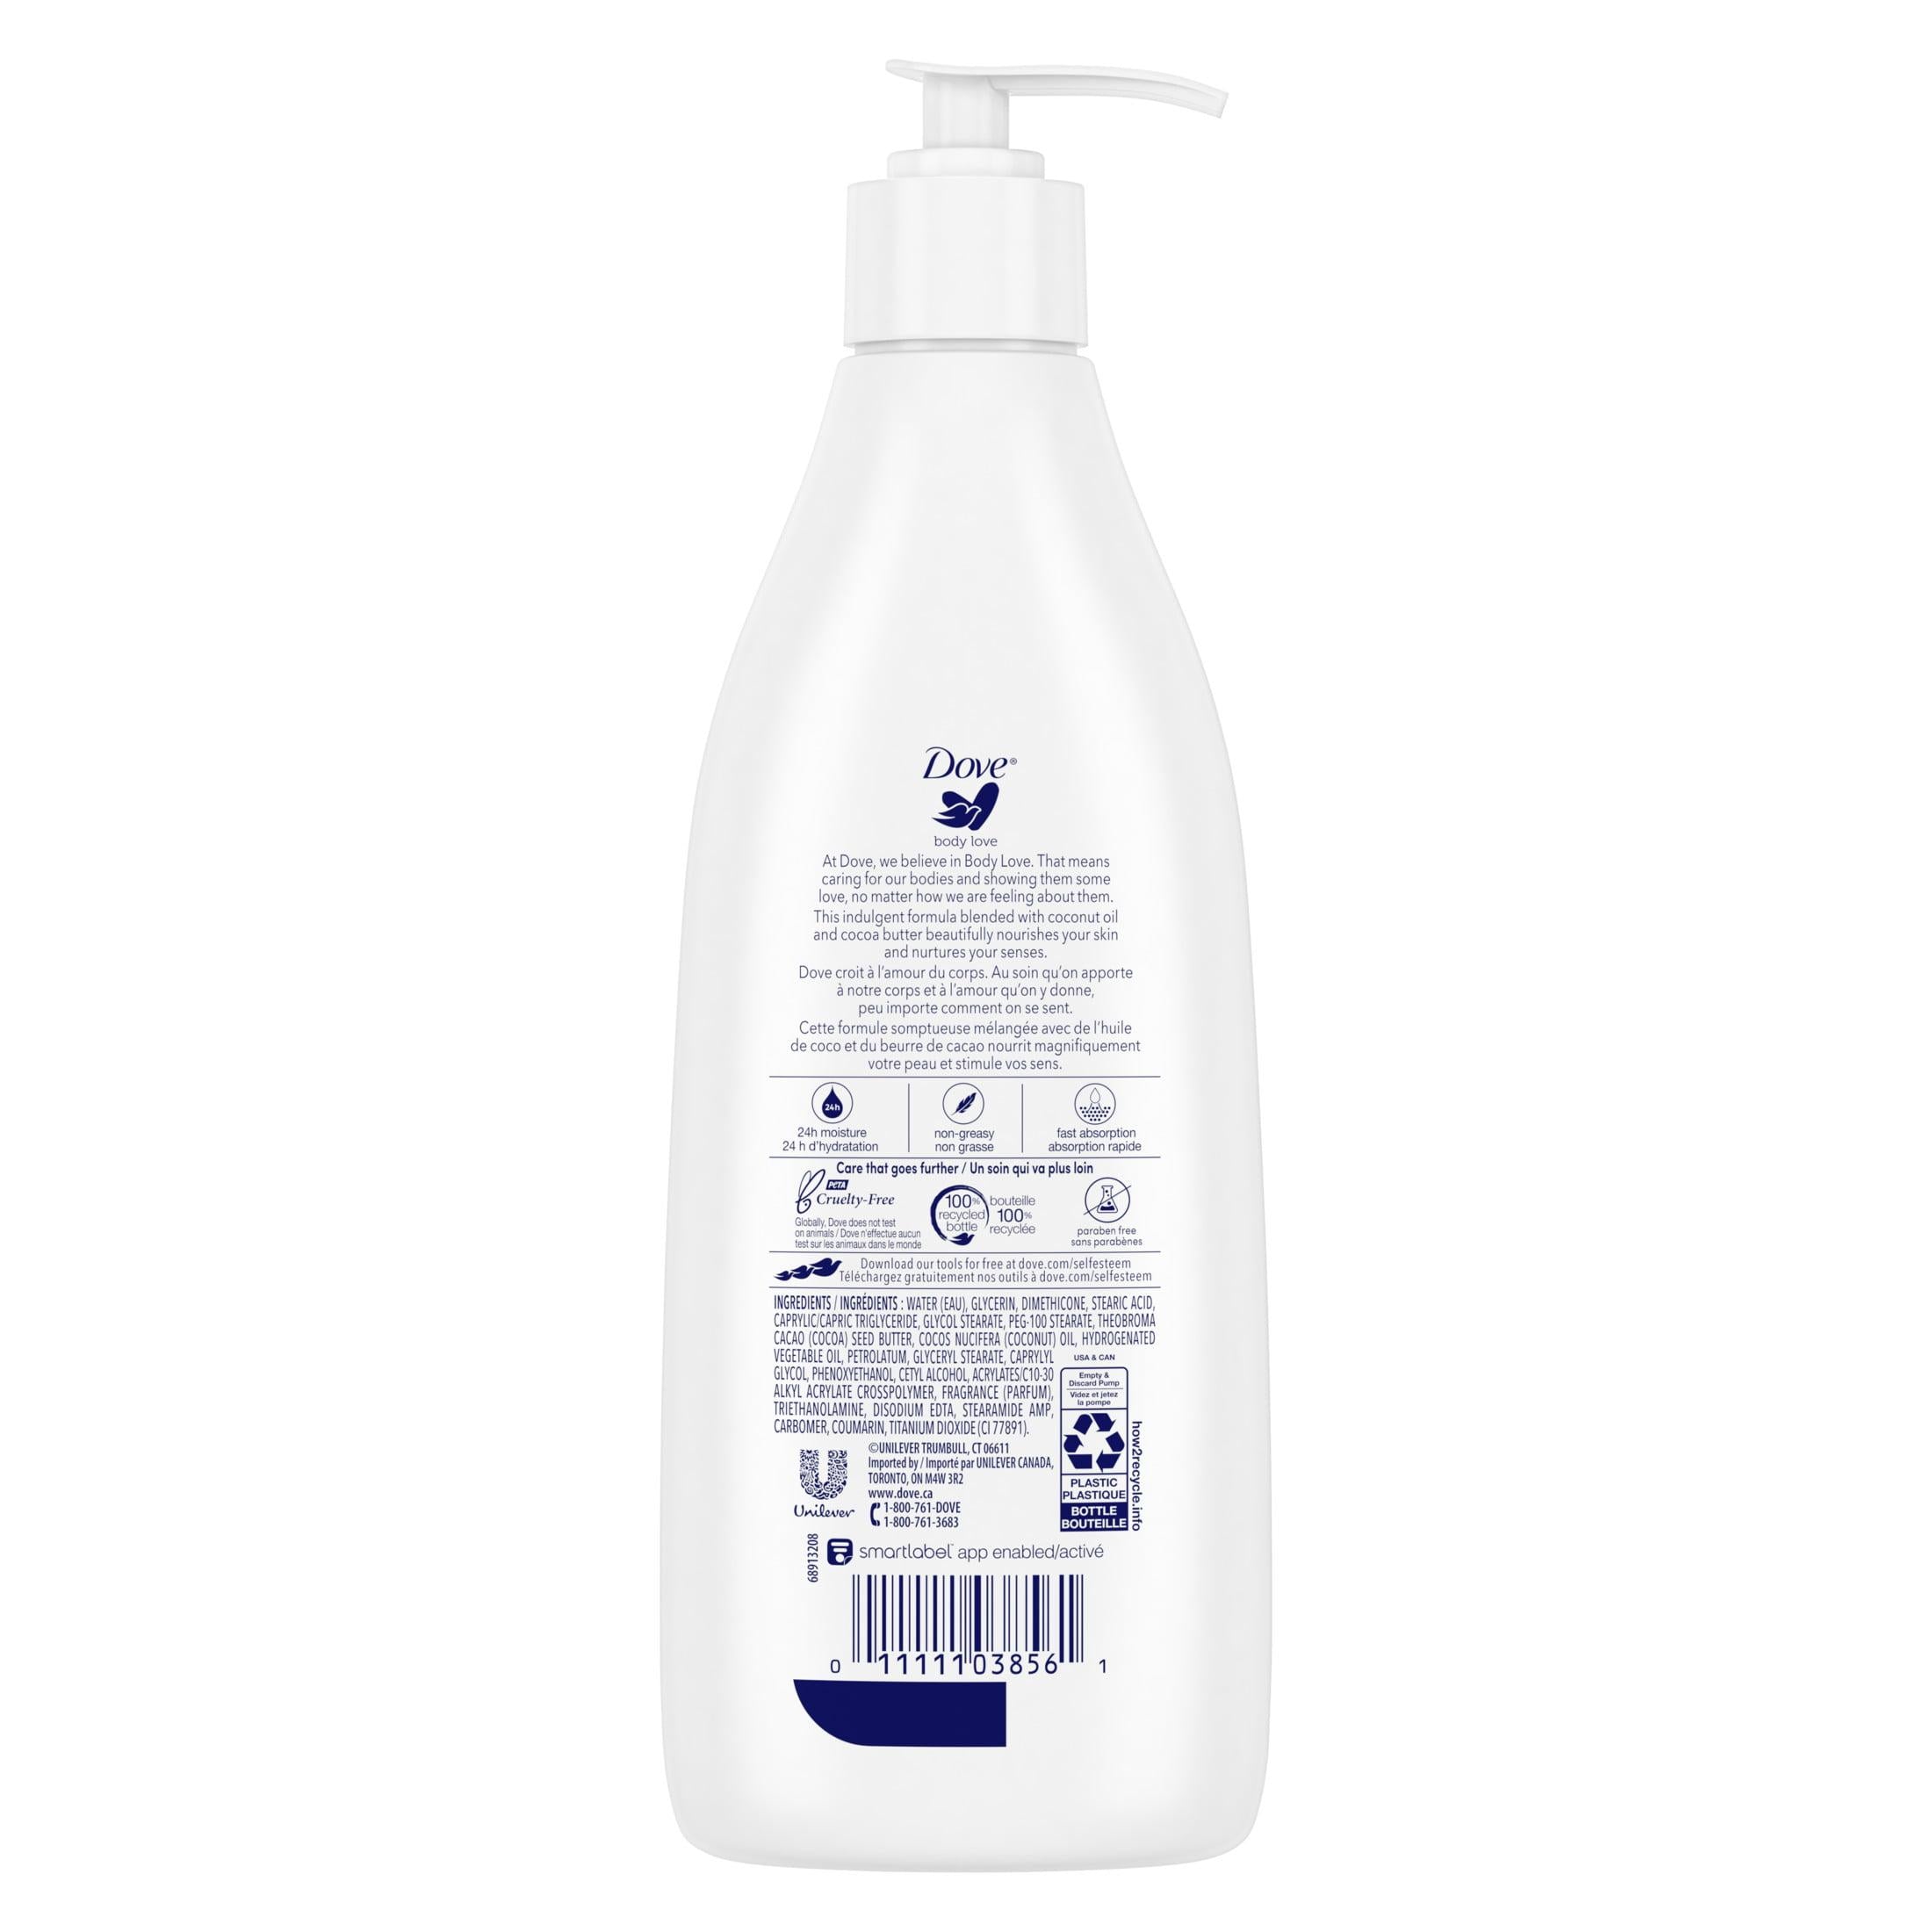 Dove Body Love Deeply Restoring Body Lotion for Dry Skin, Coconut Oil and Cocoa Butter, 13.5 fl oz | MTTS413